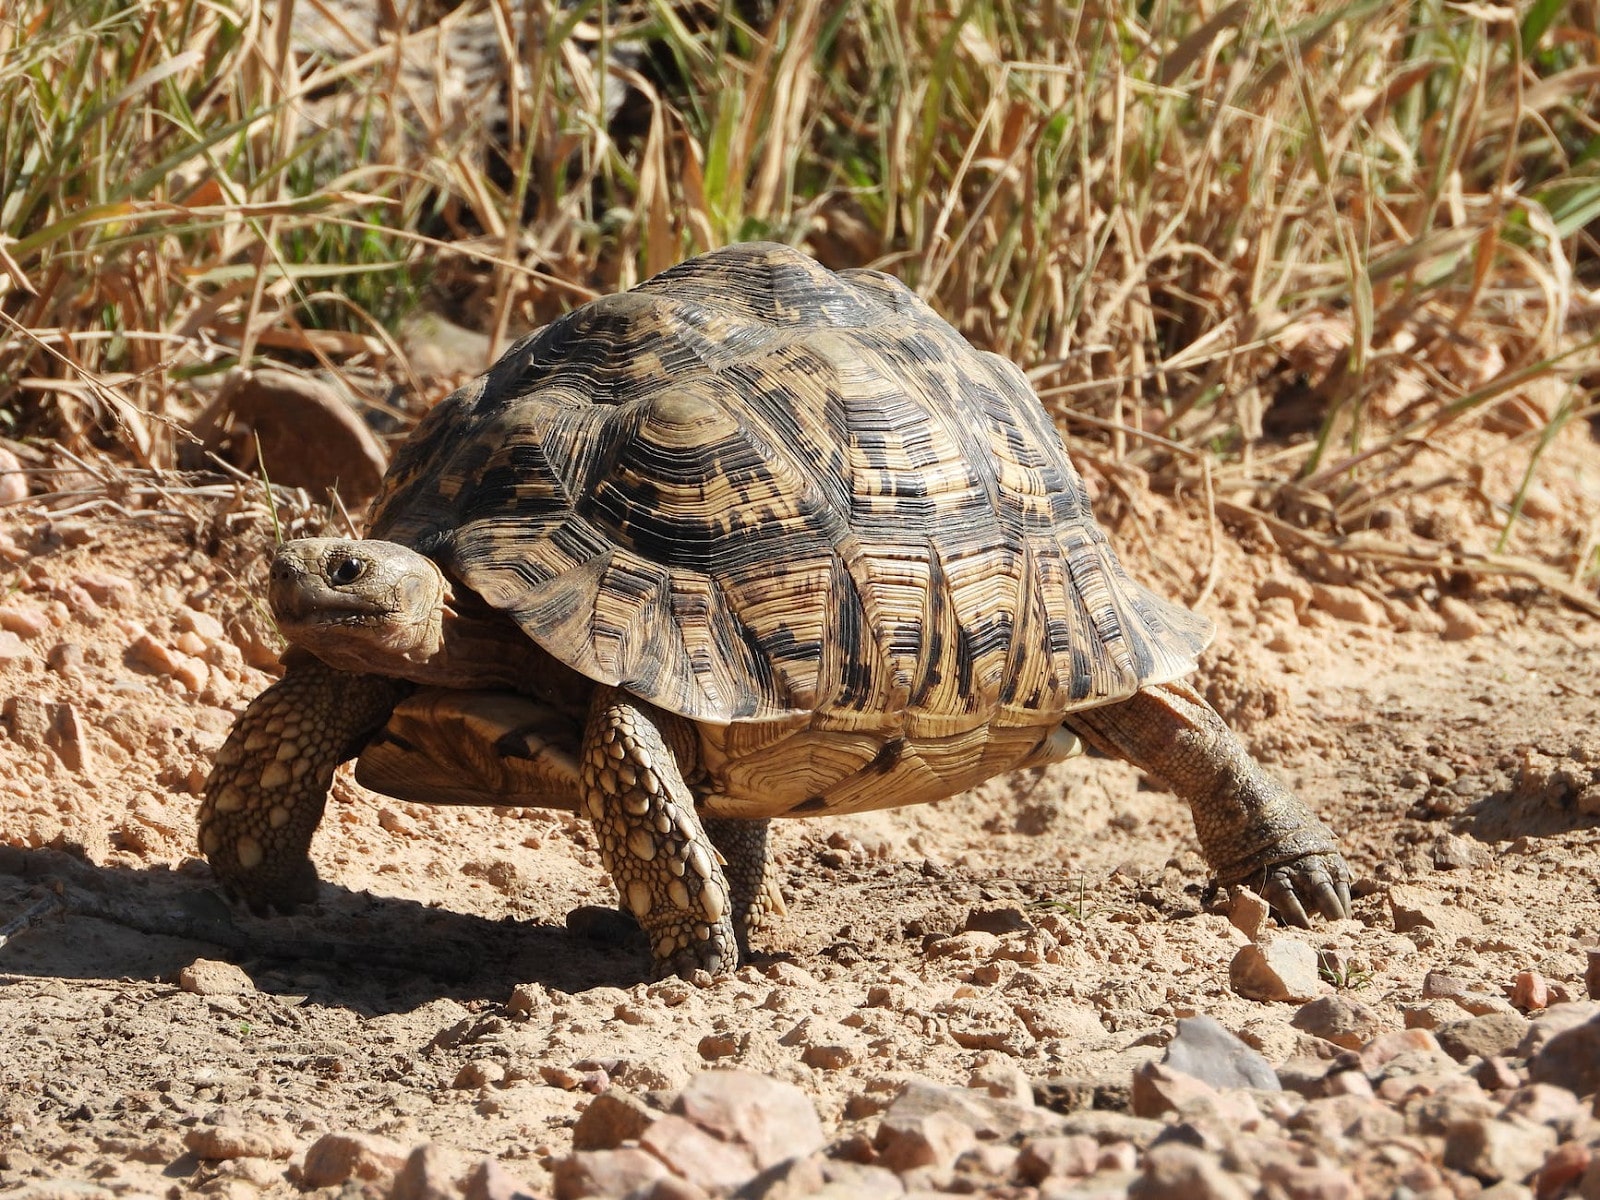 metabolic bone disease is a painful and serious condition in tortoises